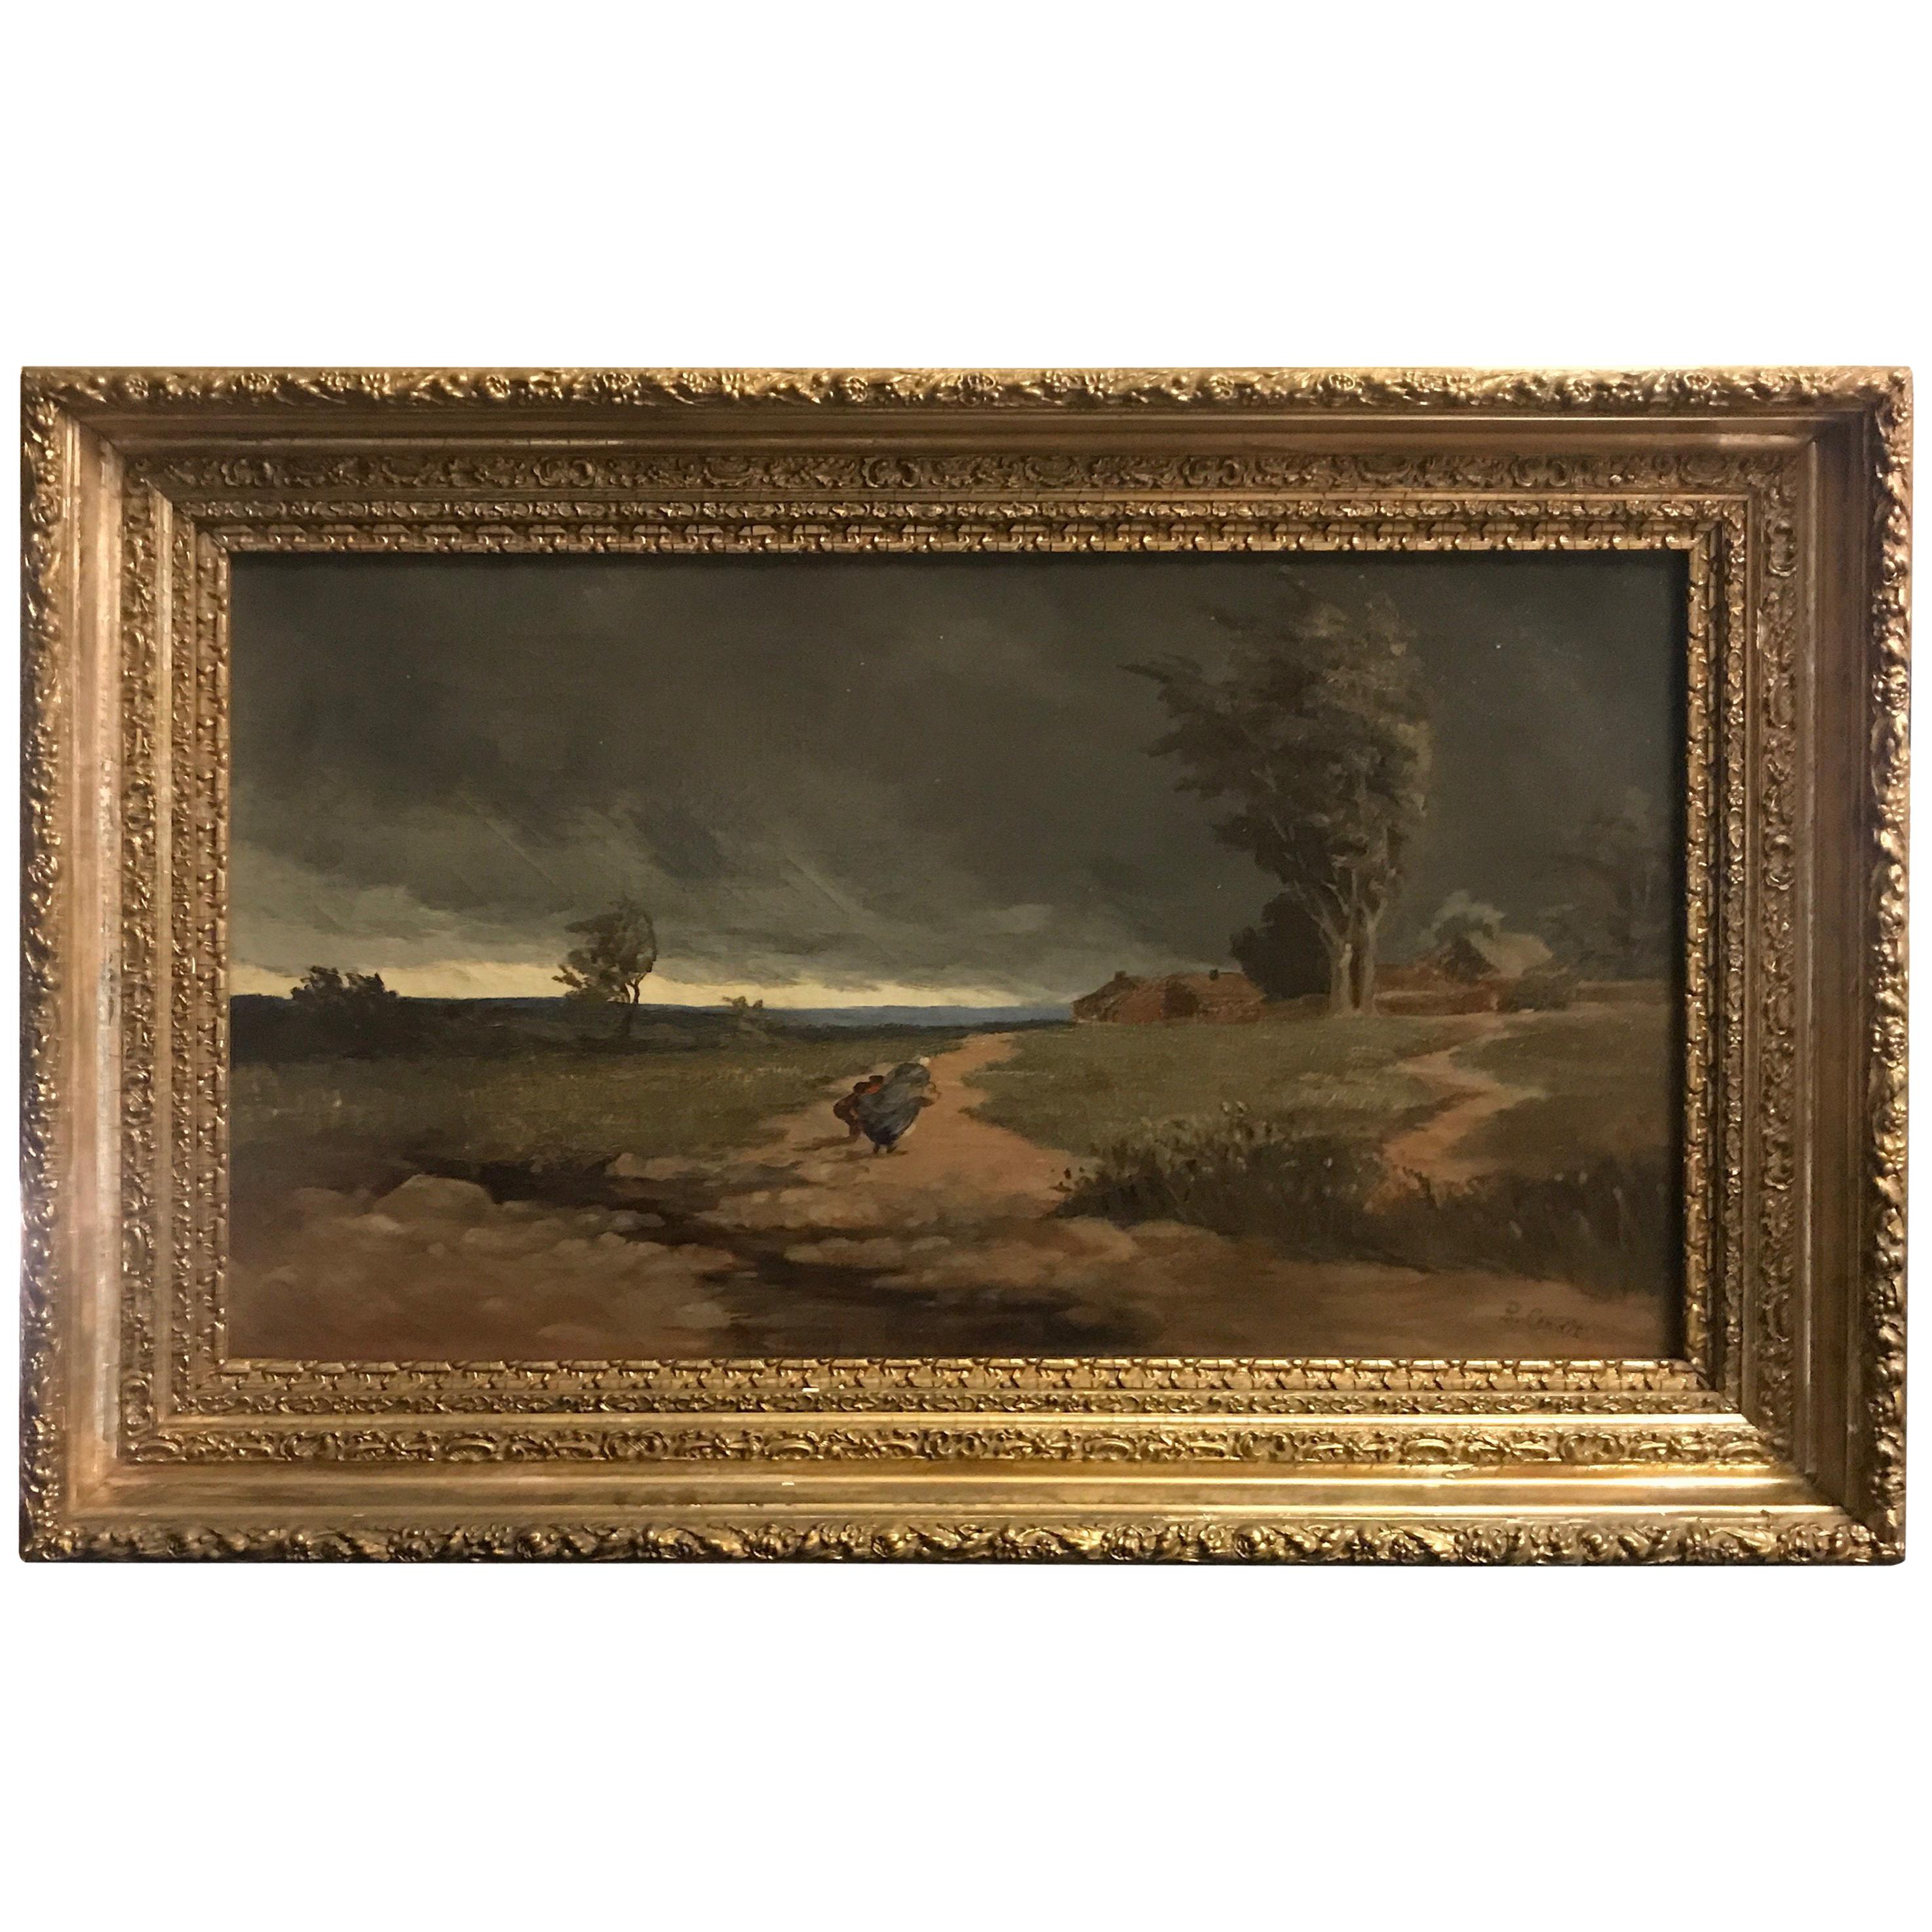 19th Century Oil Painting ”Approaching Storm” Signed B. Condit Original Frame